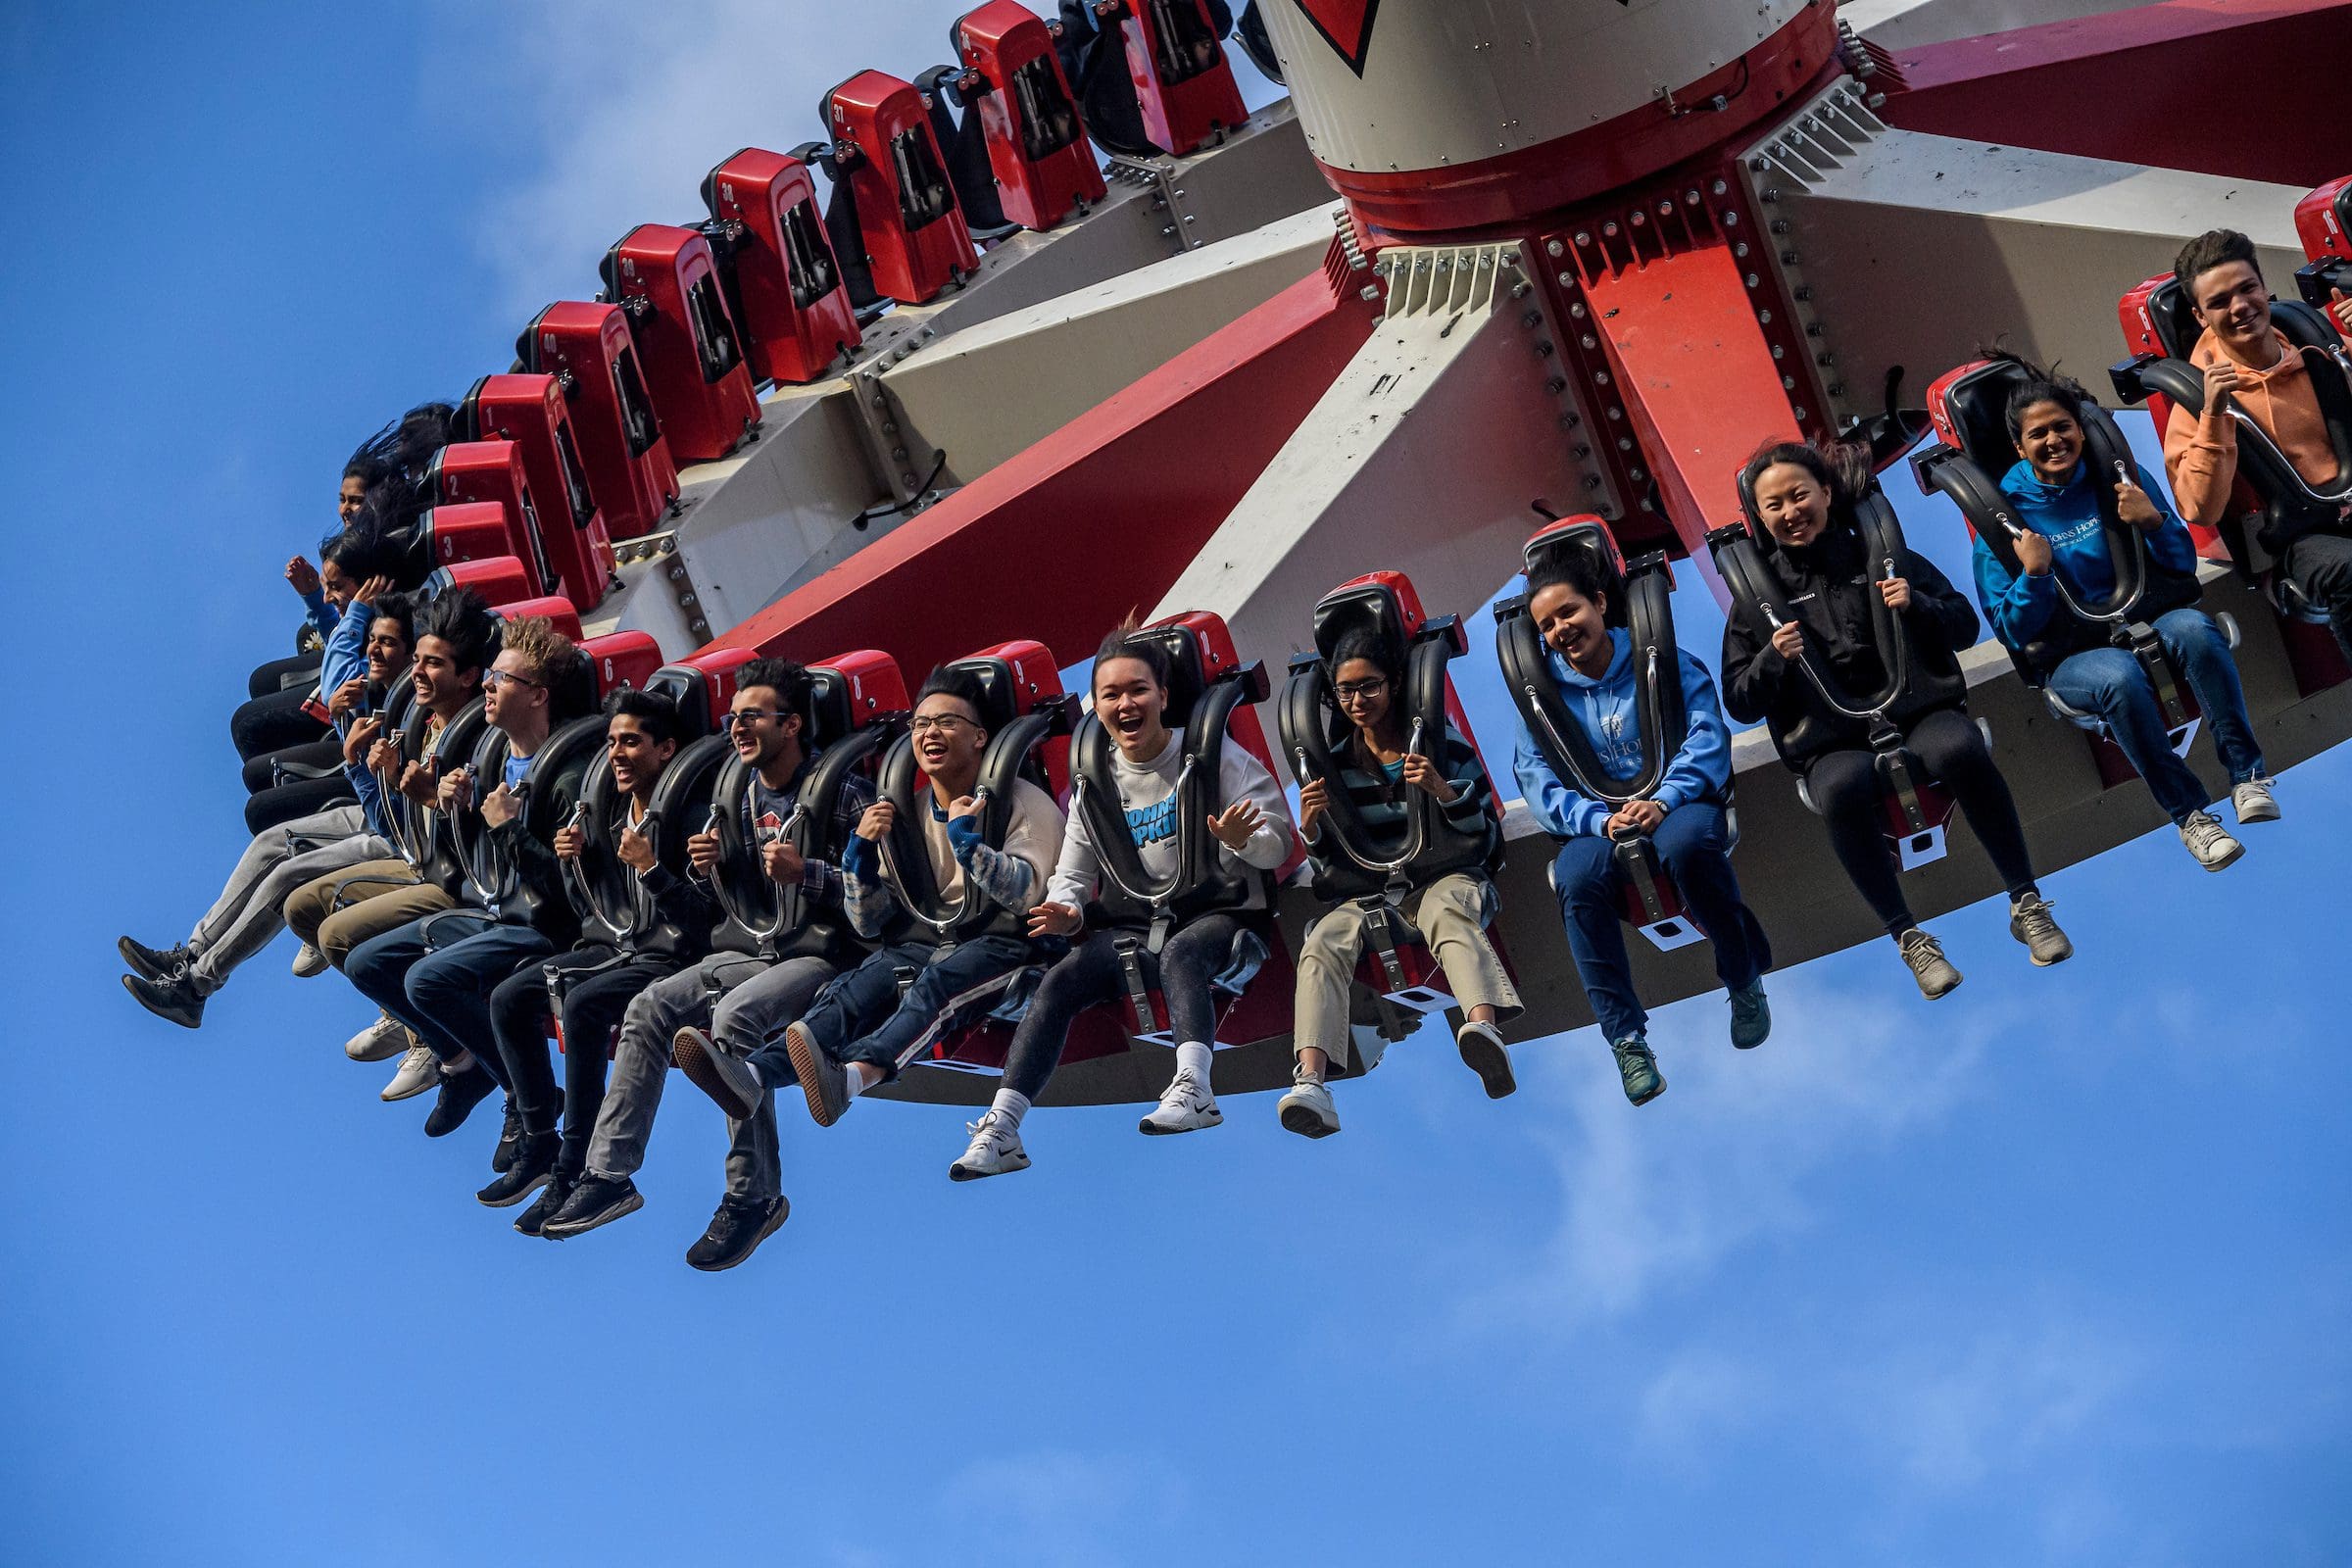 Johns Hopkins’s Other Engineering Lab: The Voodoo Drop at Six Flags